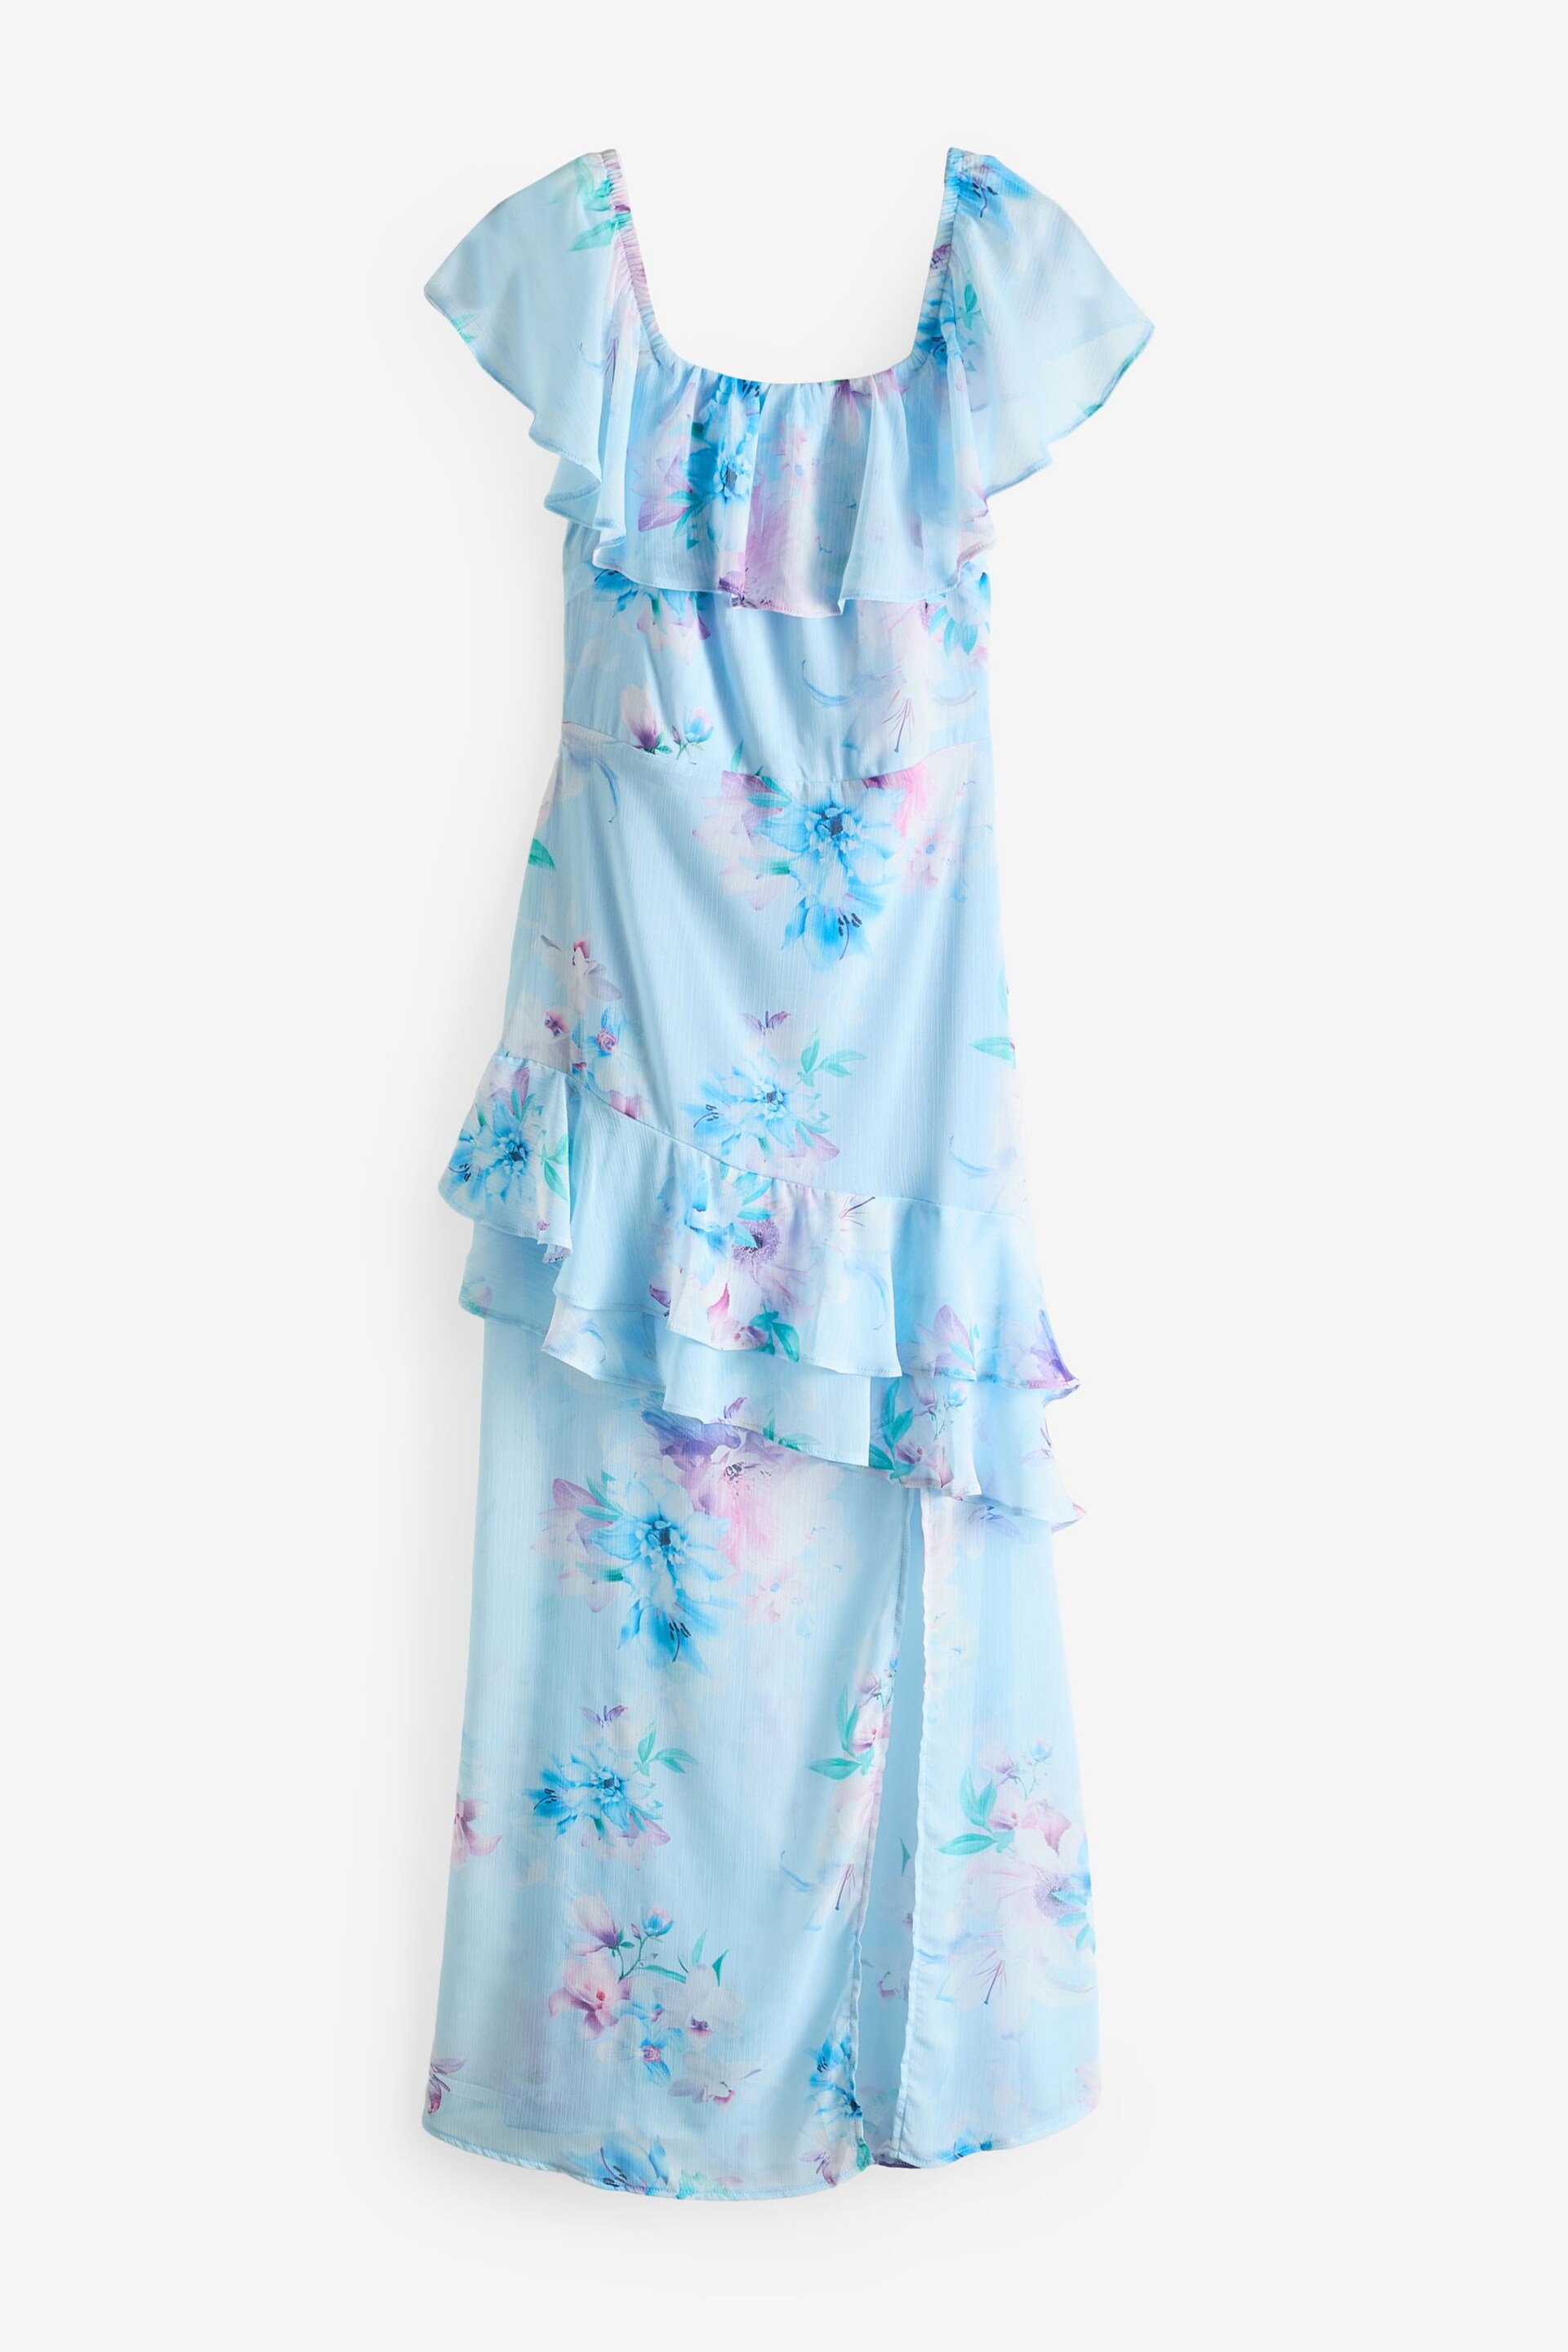 Sistaglam Blue Bardot Floaty Floral Maxi Dress With Front Split - Image 5 of 5